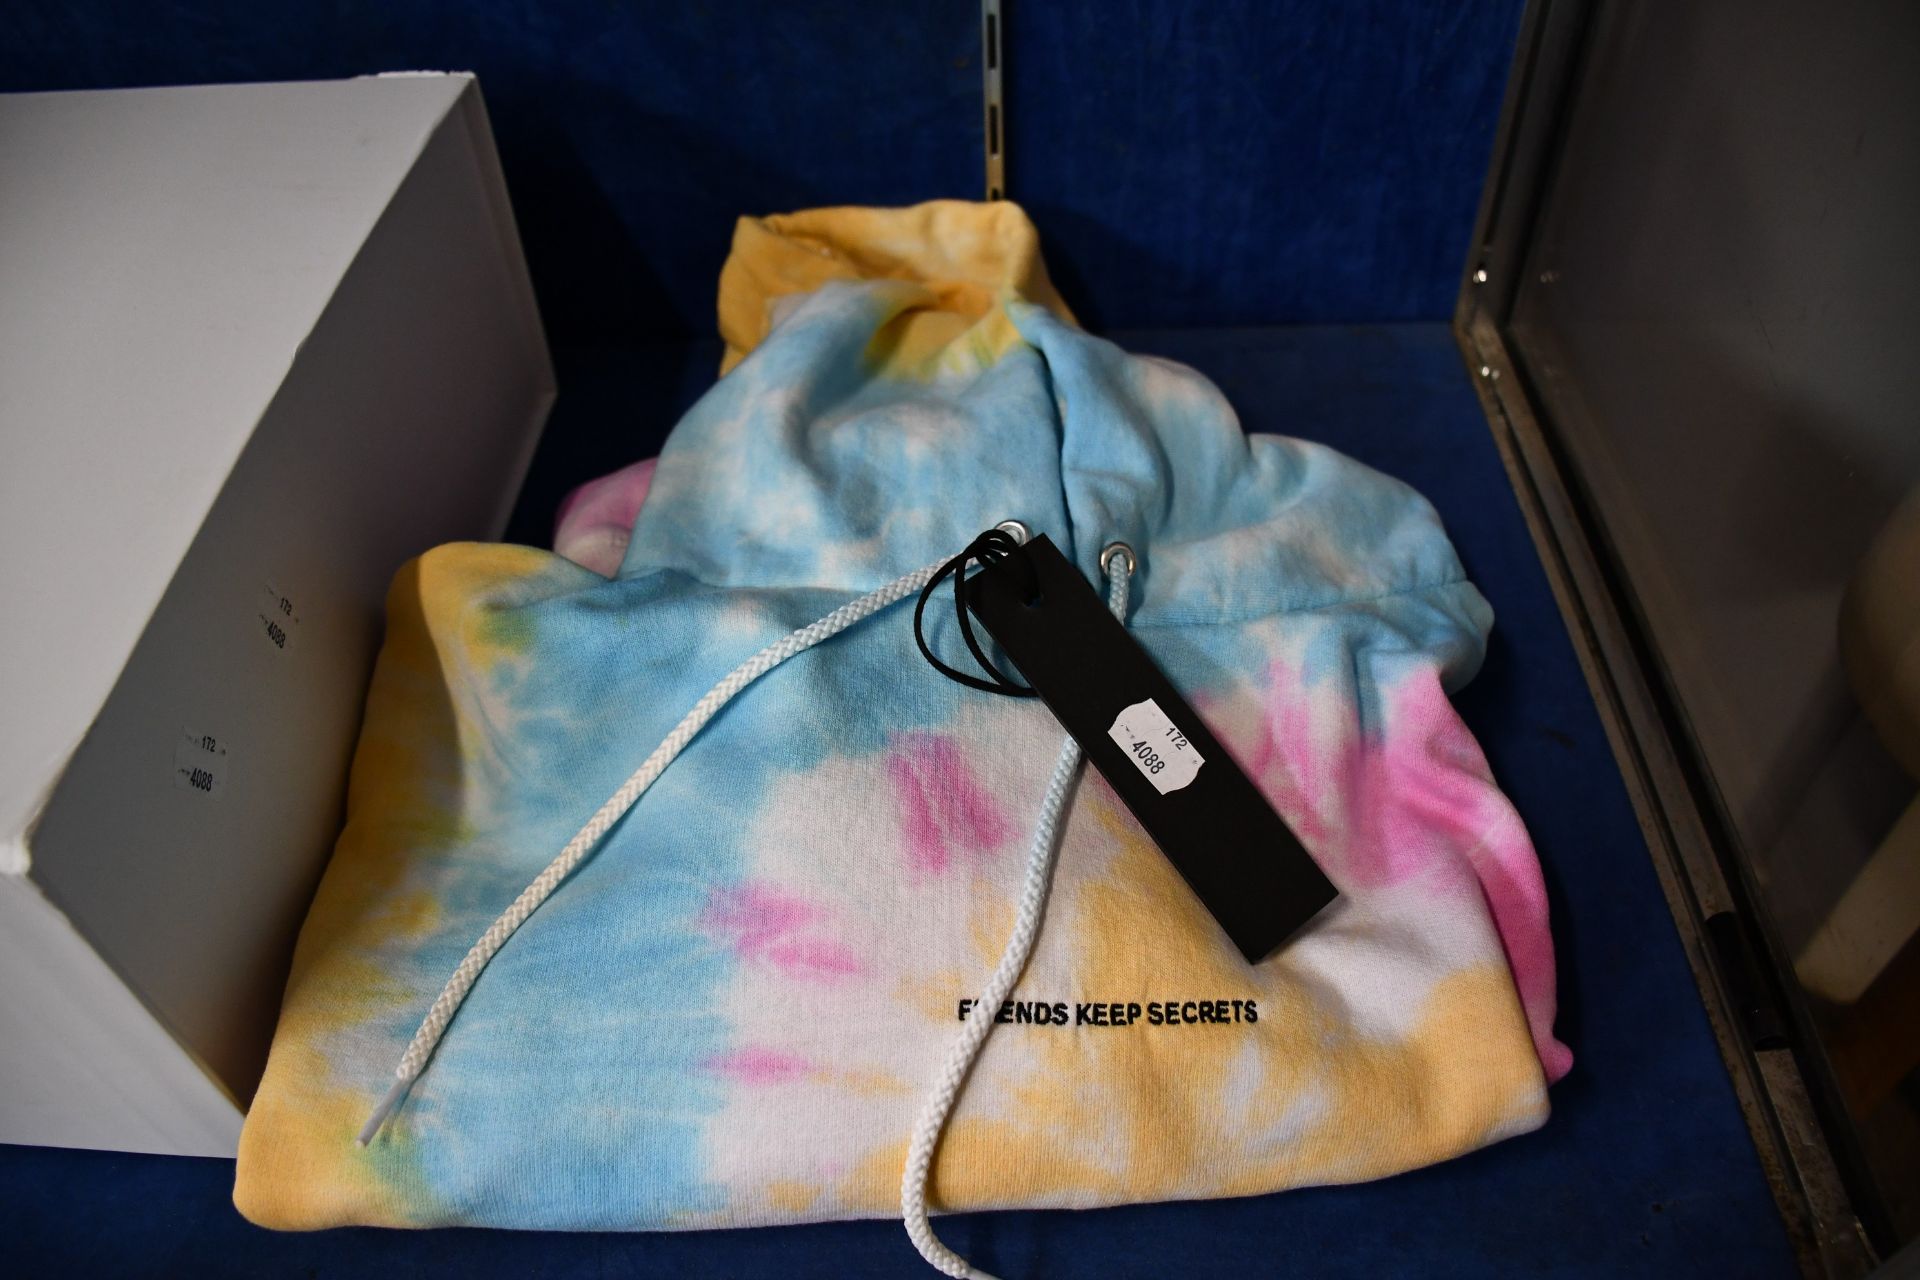 An as new Benny Blanco Friends Keep Secrets hand dyed hoodie designed by Saint Luis (Size unknown).